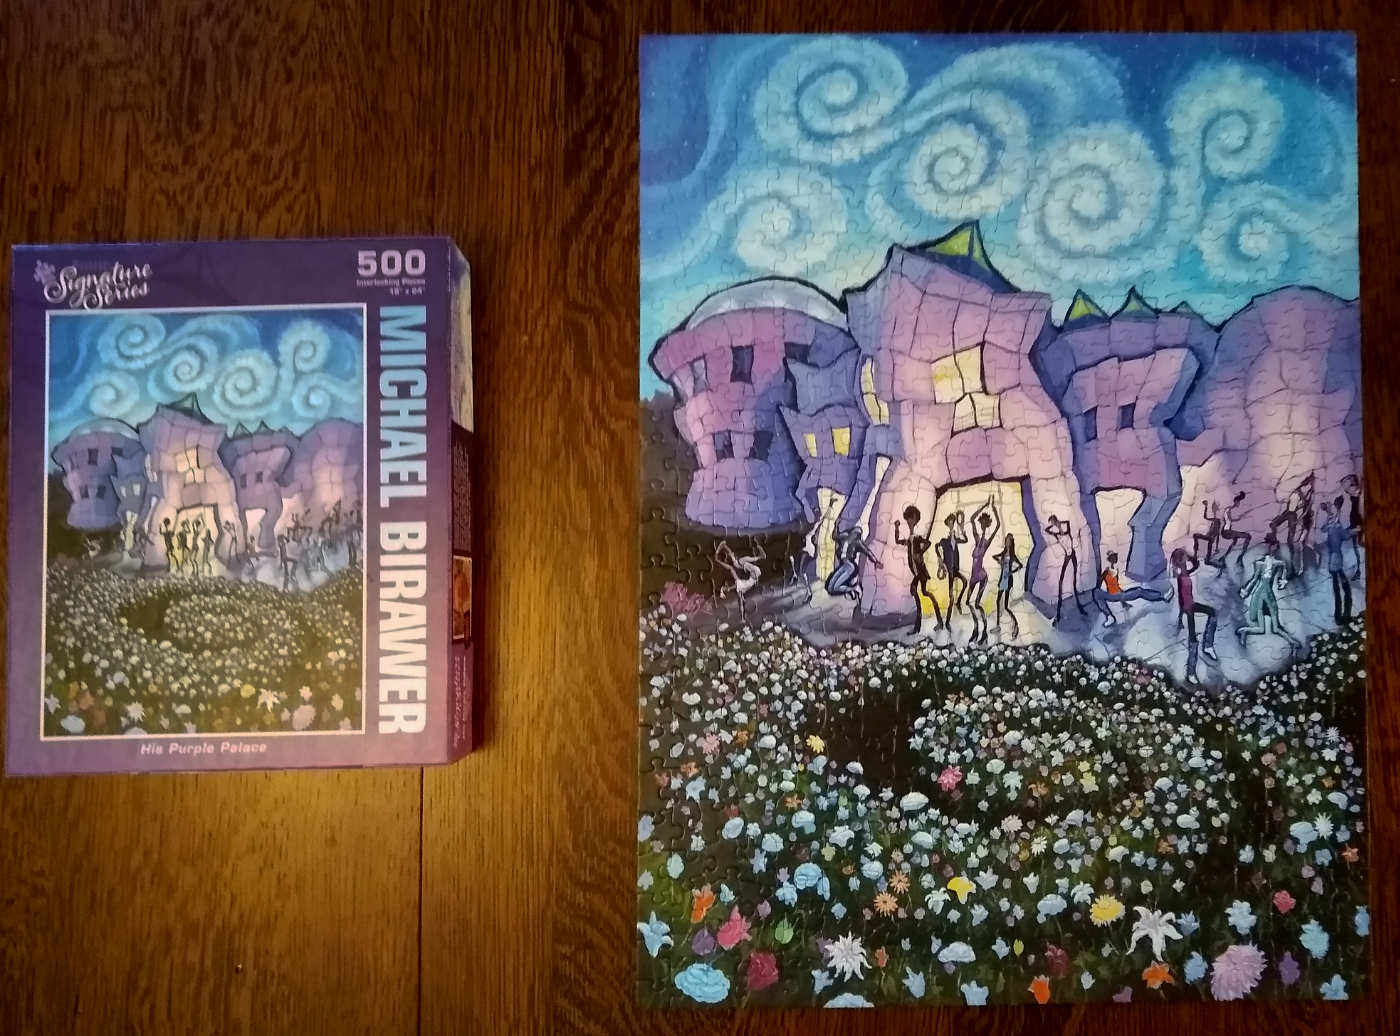 puzzle box on table next to a larger finished puzzle wit spiral garden, people dancing in front of purple building, with a sky of swirling clouds